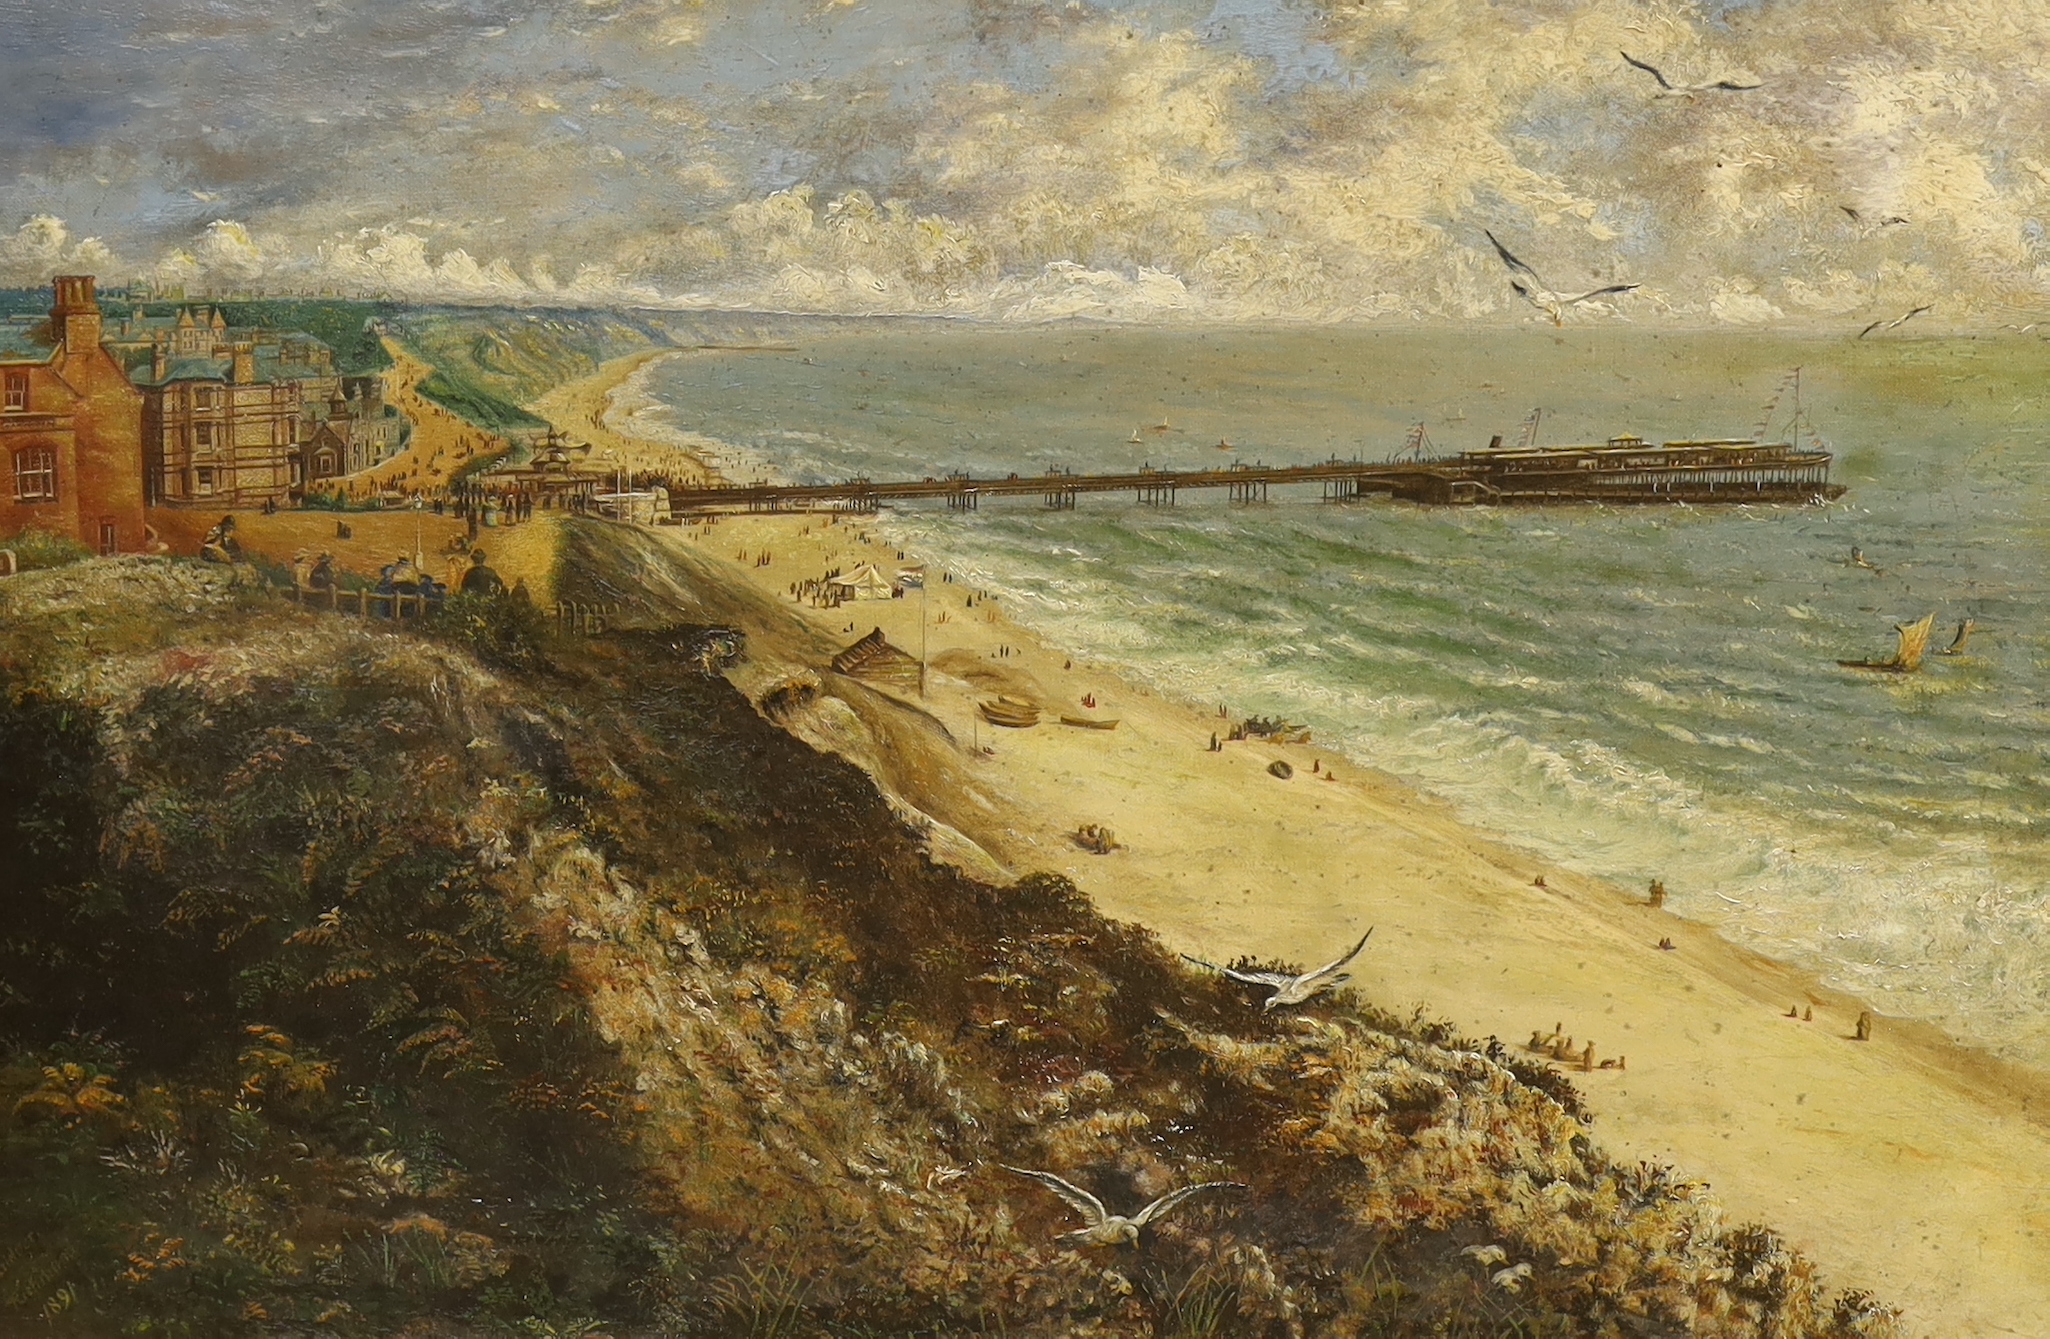 W. Bridger, late 19th century oil on canvas, 'Coastal scene with pier', signed and inscribed ‘Richmond’, 64 x 42cm